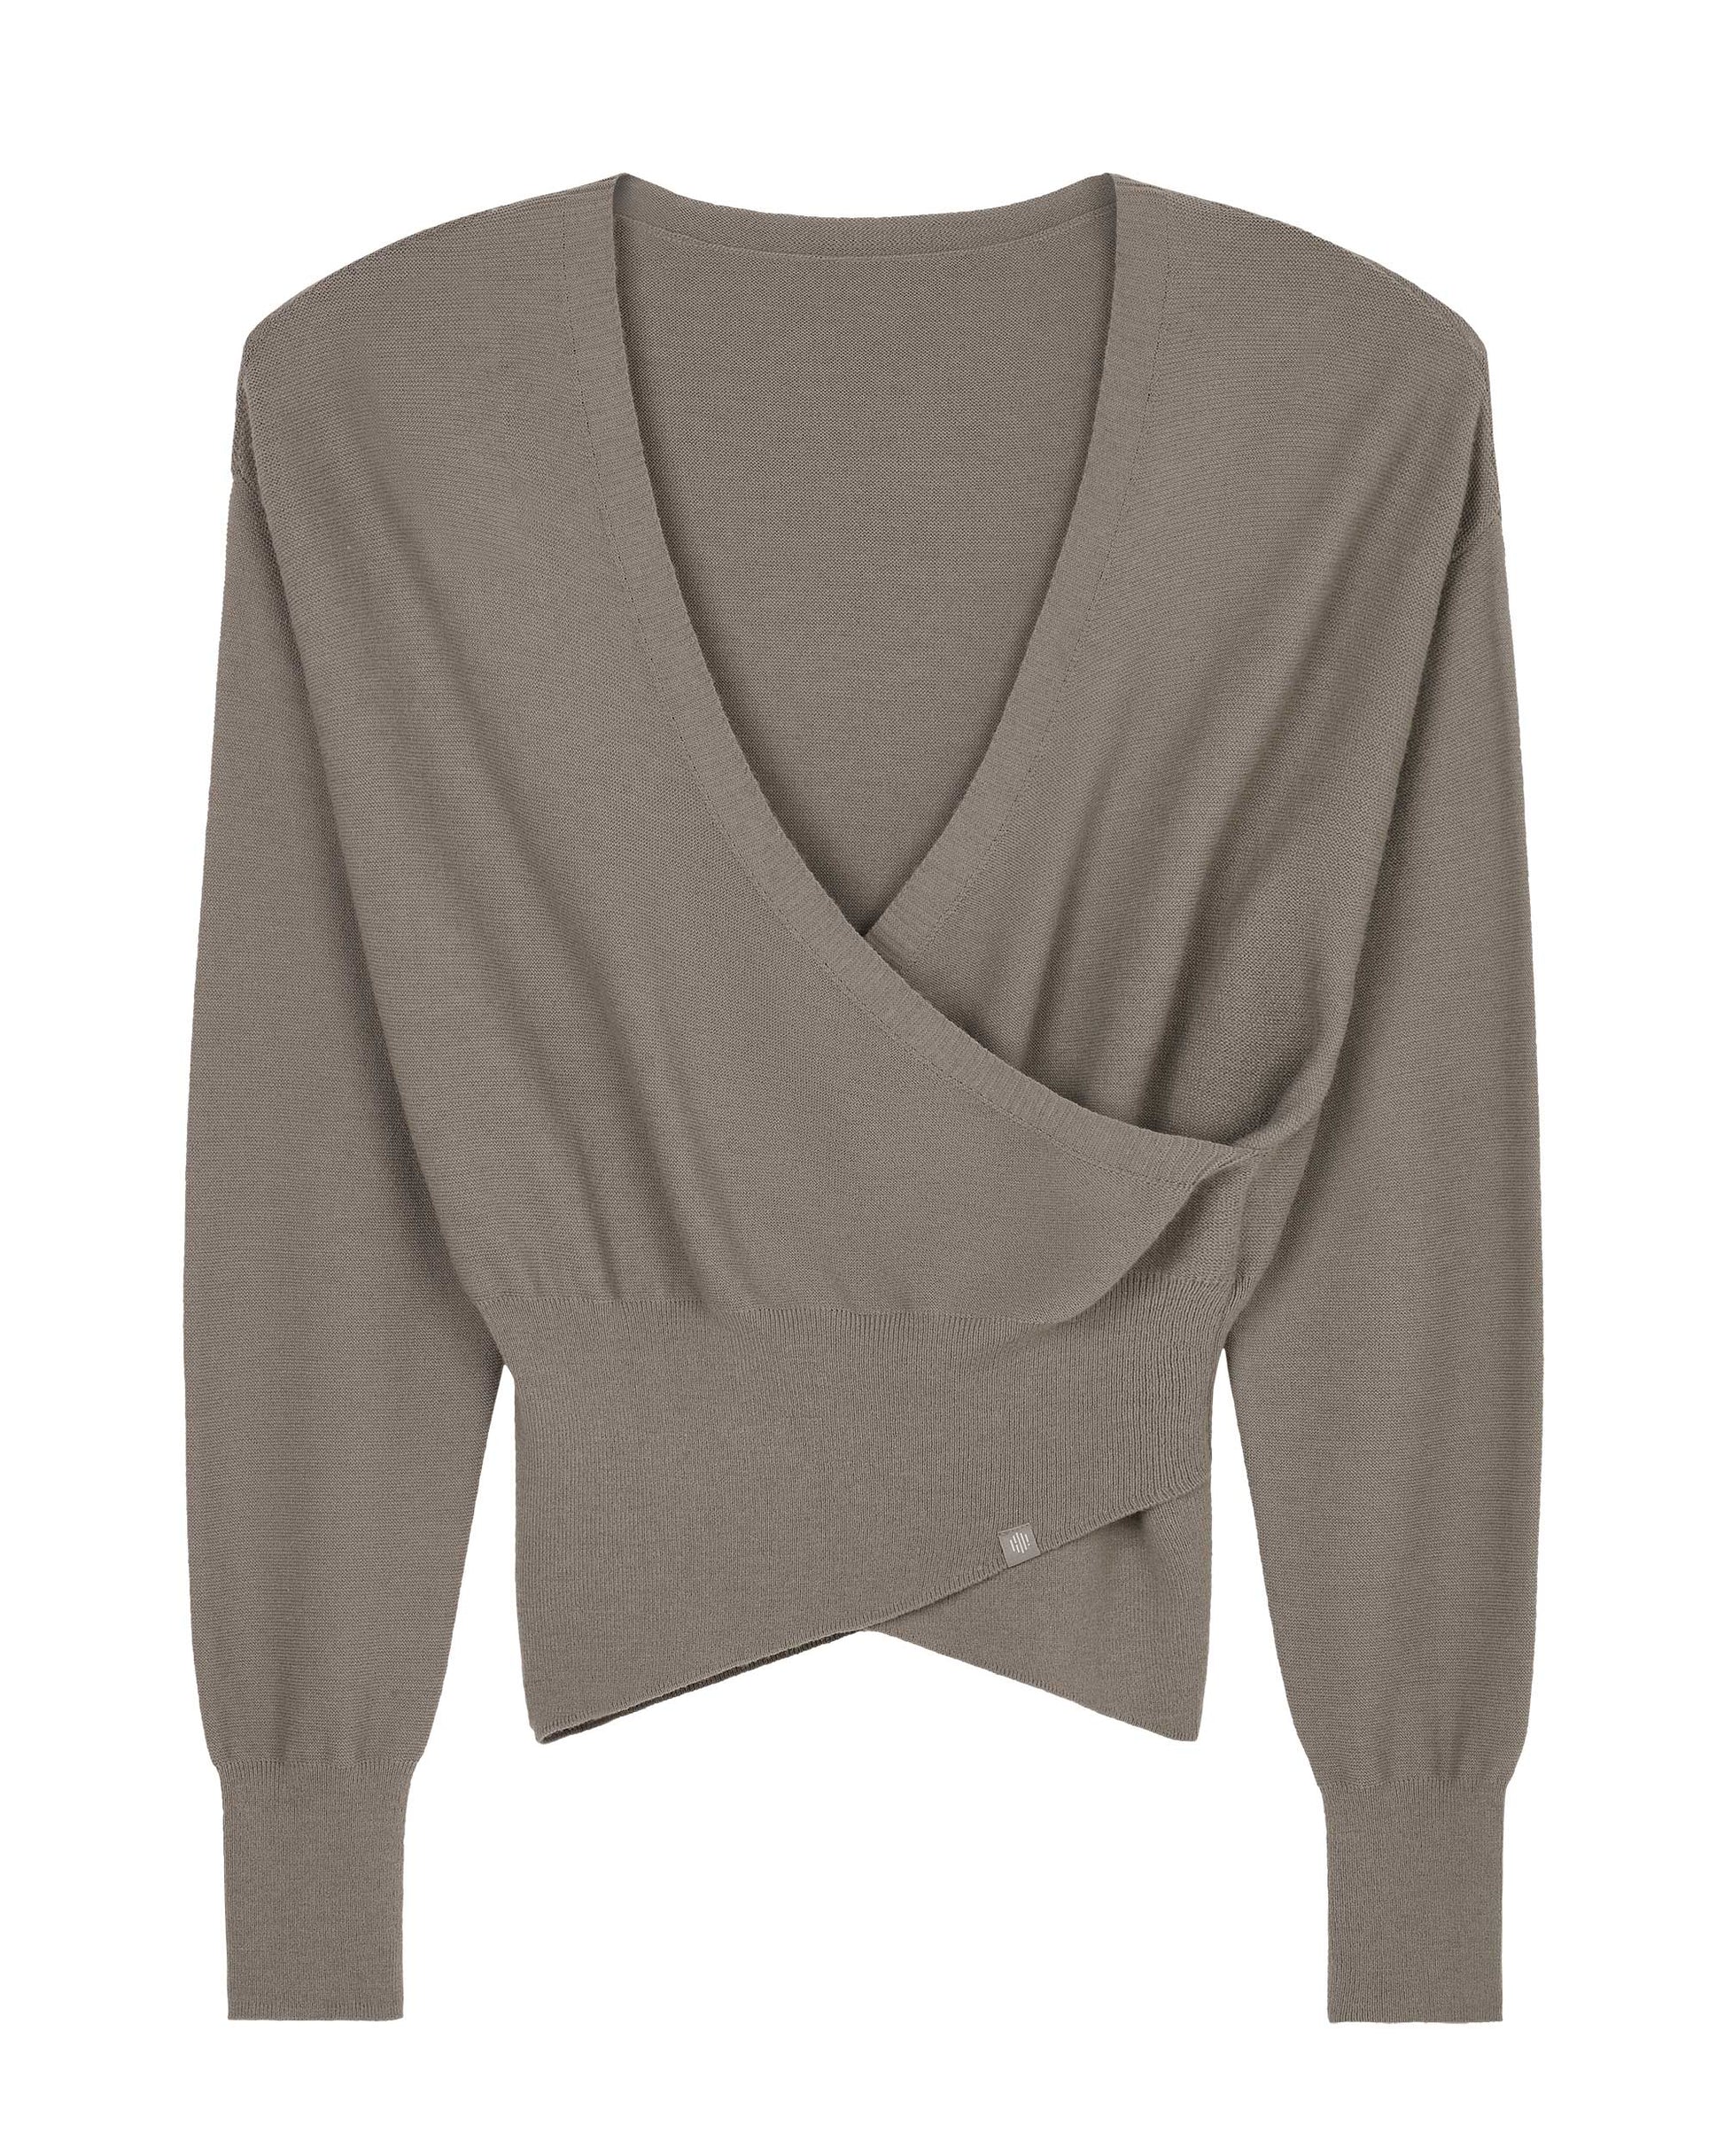 taupe wrap sweater